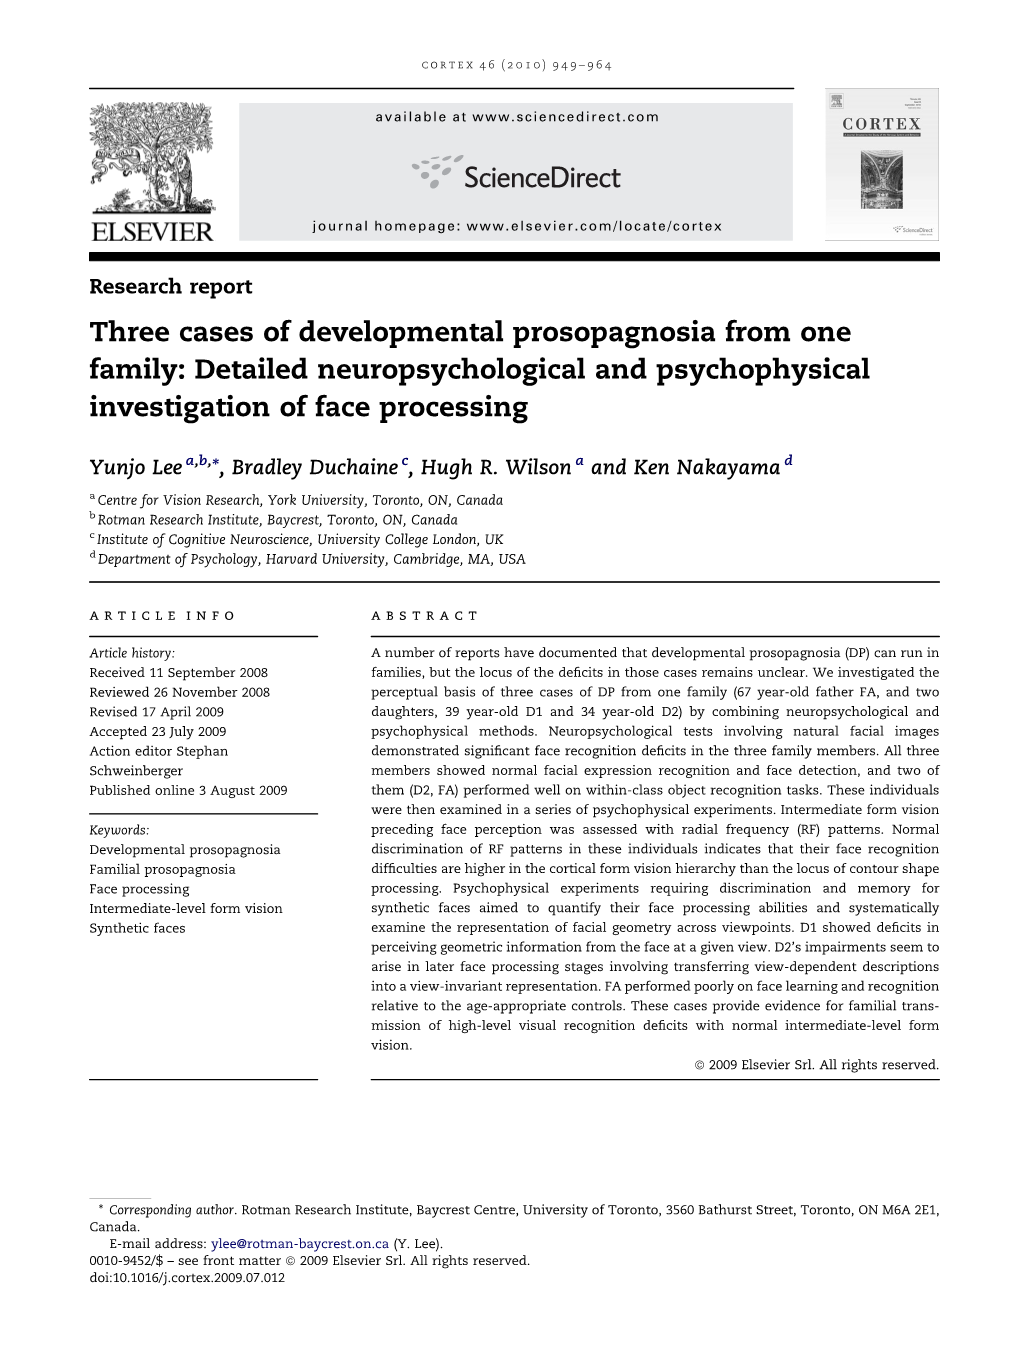 Three Cases of Developmental Prosopagnosia from One Family: Detailed Neuropsychological and Psychophysical Investigation of Face Processing